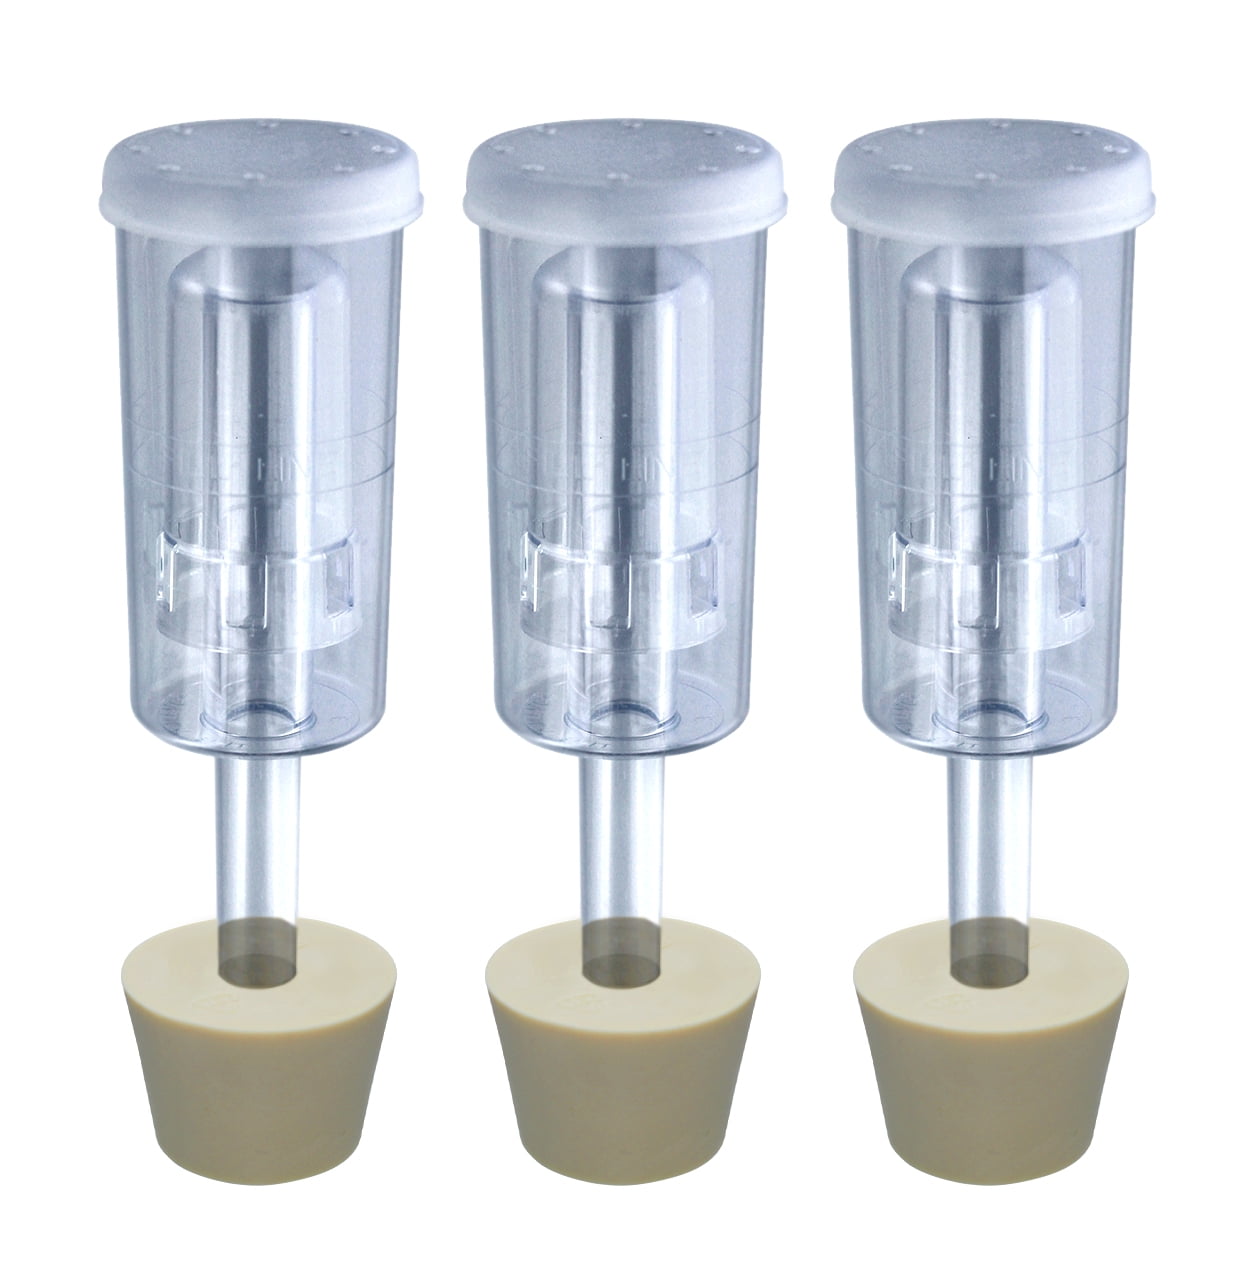 3 Piece Fermentation AIRLOCK 3 PACK ~ #6.5 Stoppers Beer Wine / Airlocks 